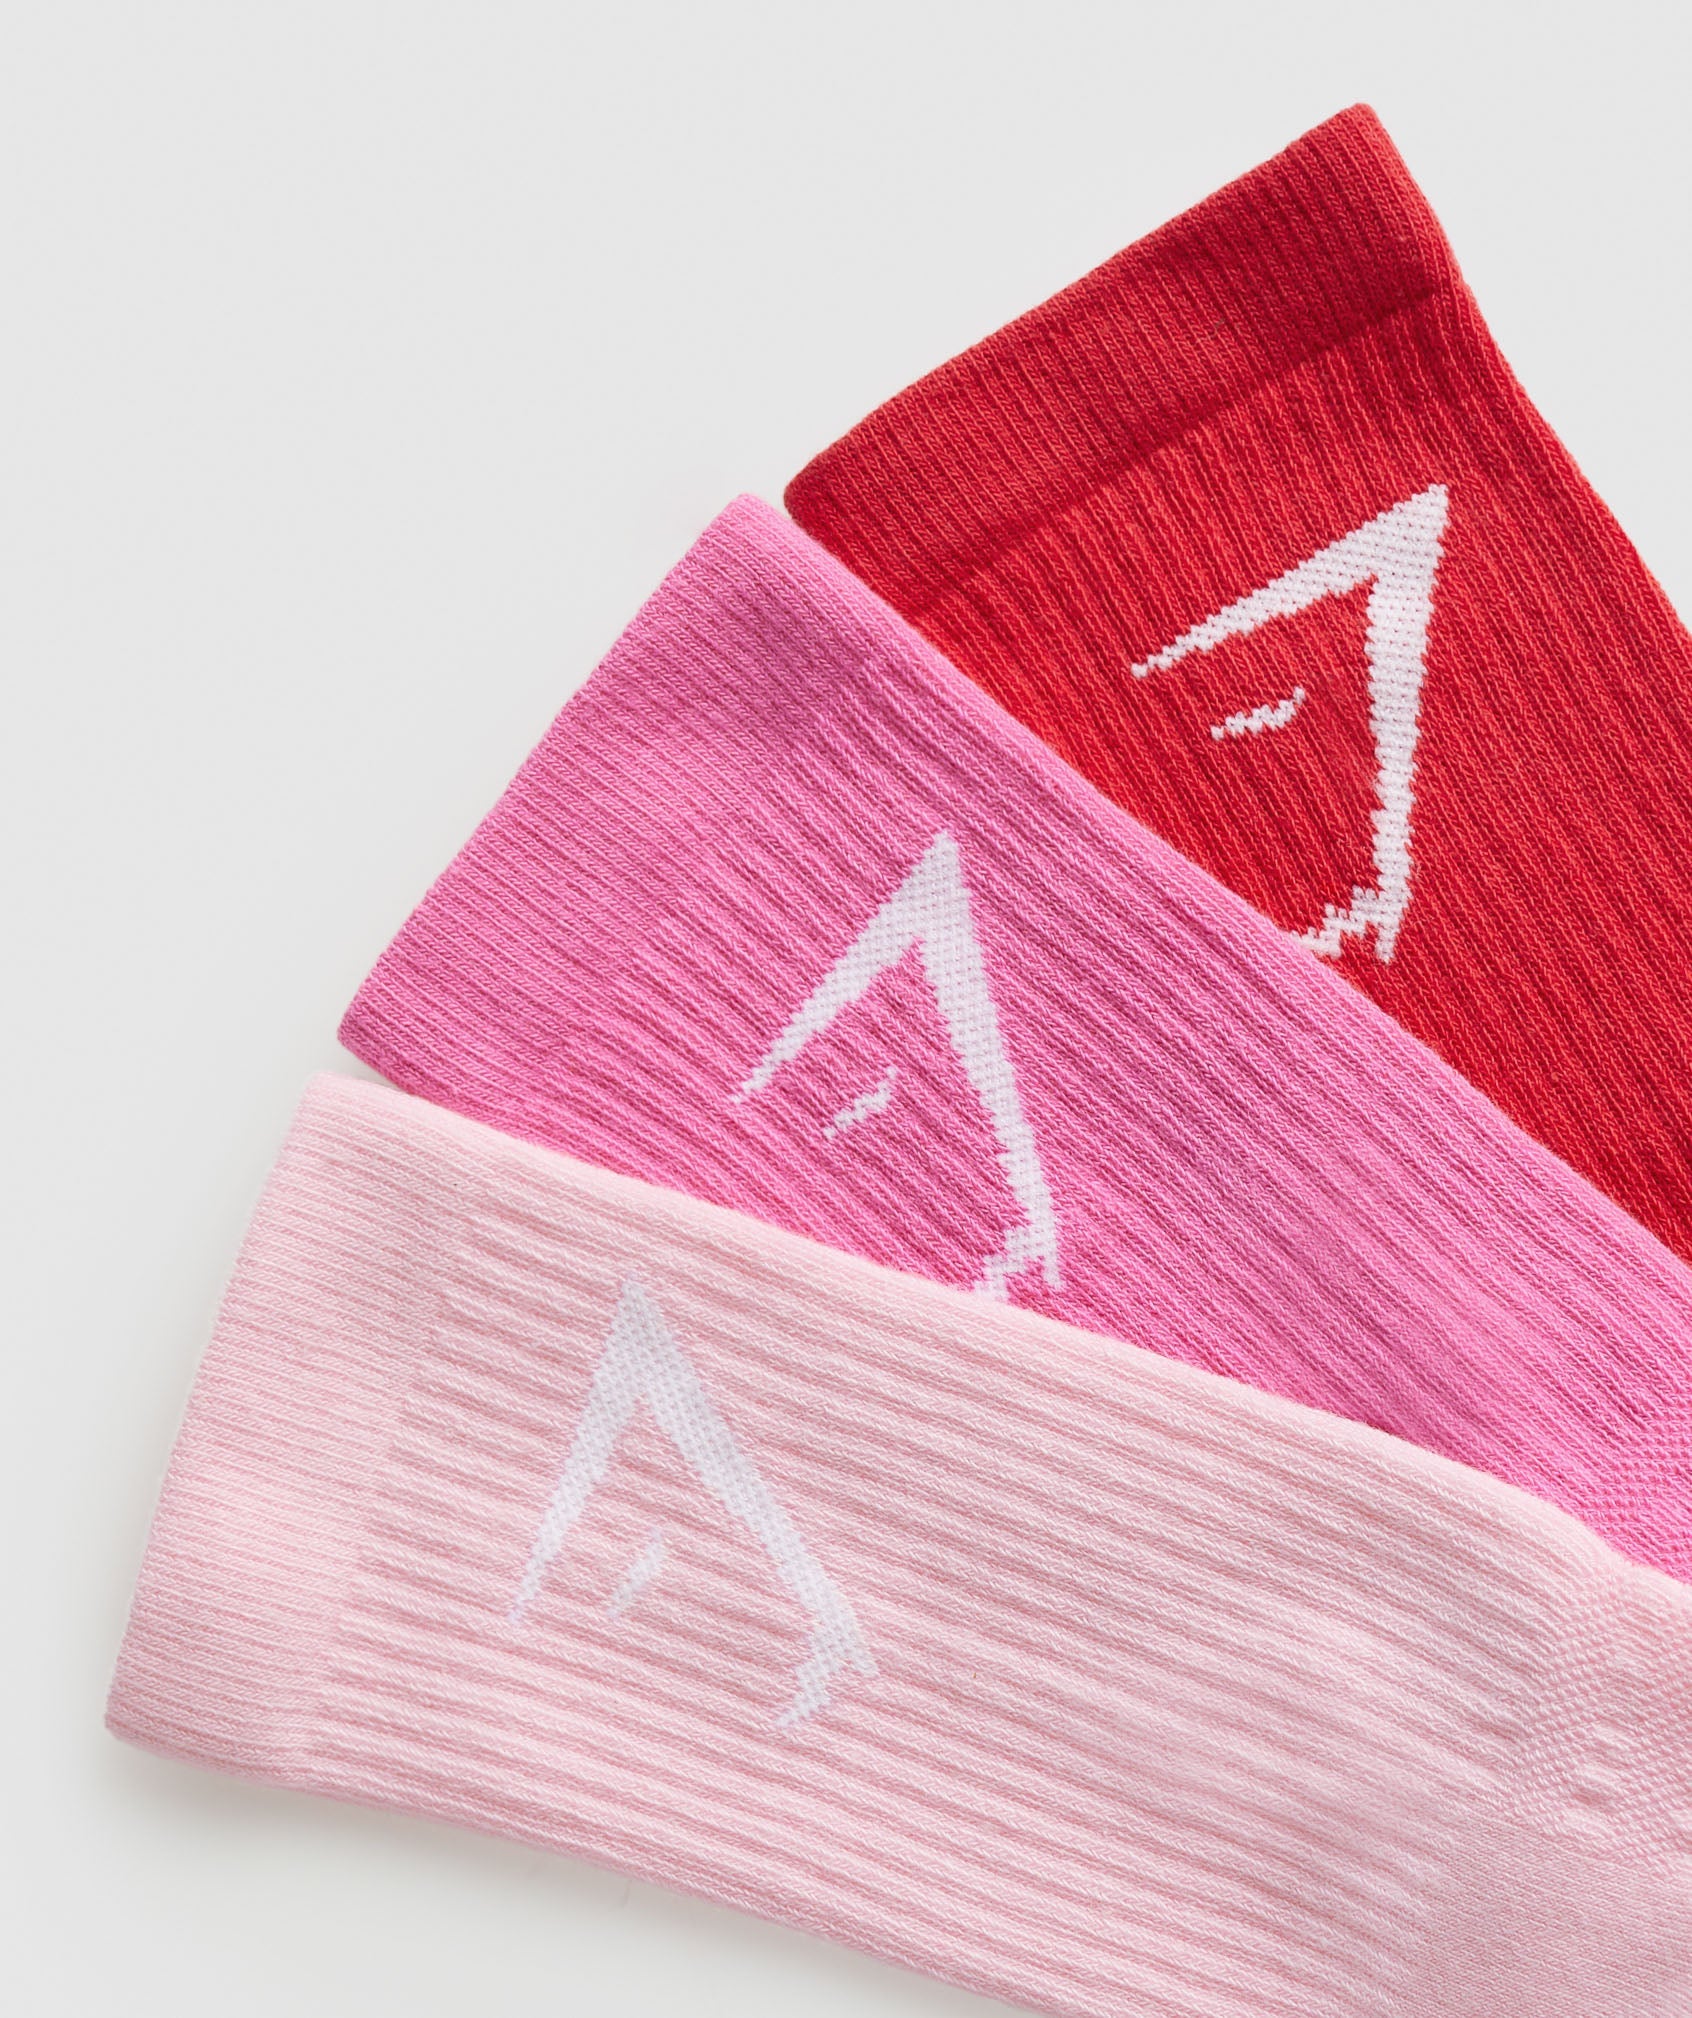 Crew Socks 3pk in Dolly Pink/Fetch Pink/Jamz Red - view 2